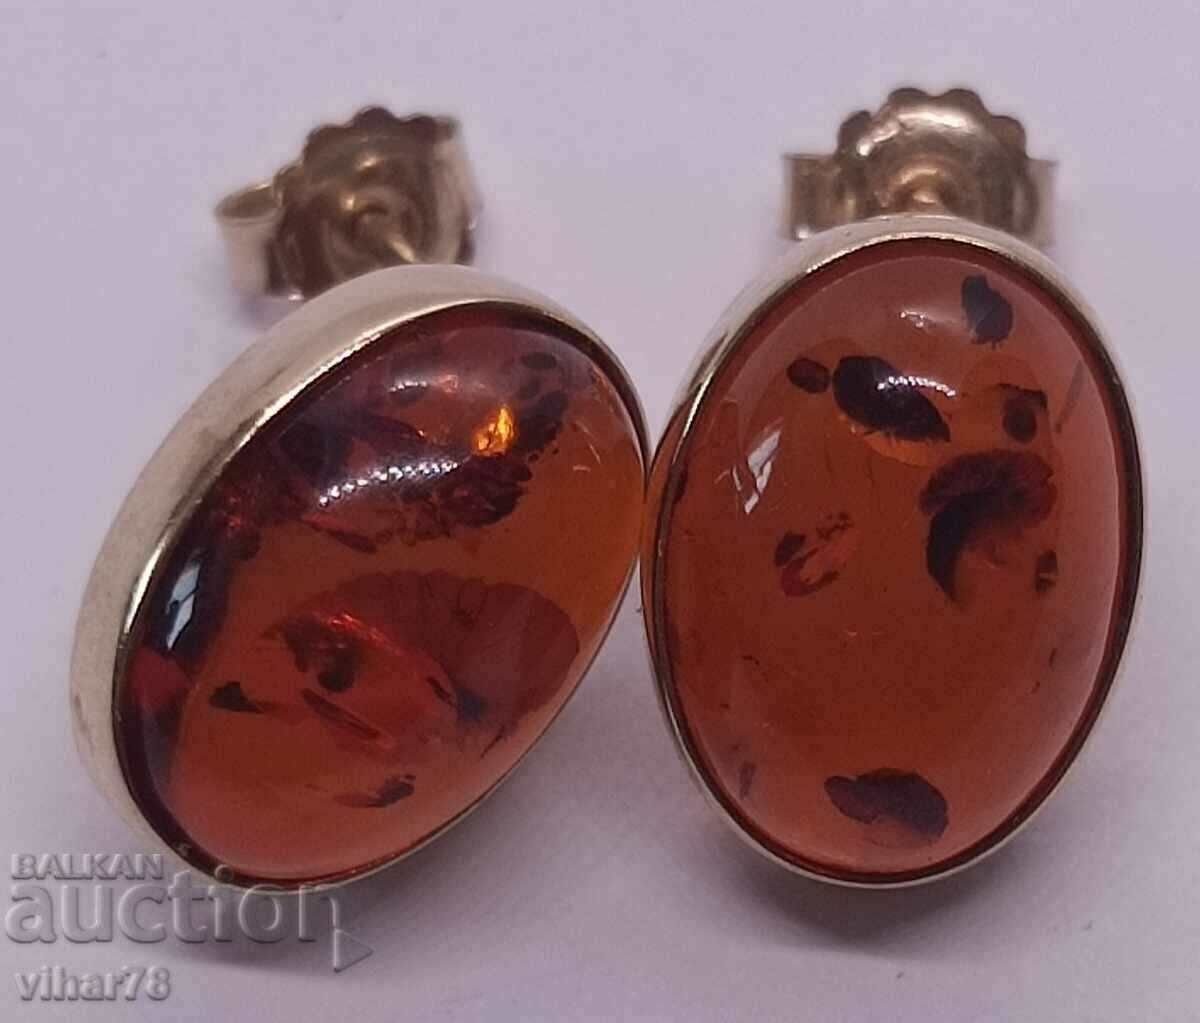 Beautiful 9k/375 gold earrings with amber